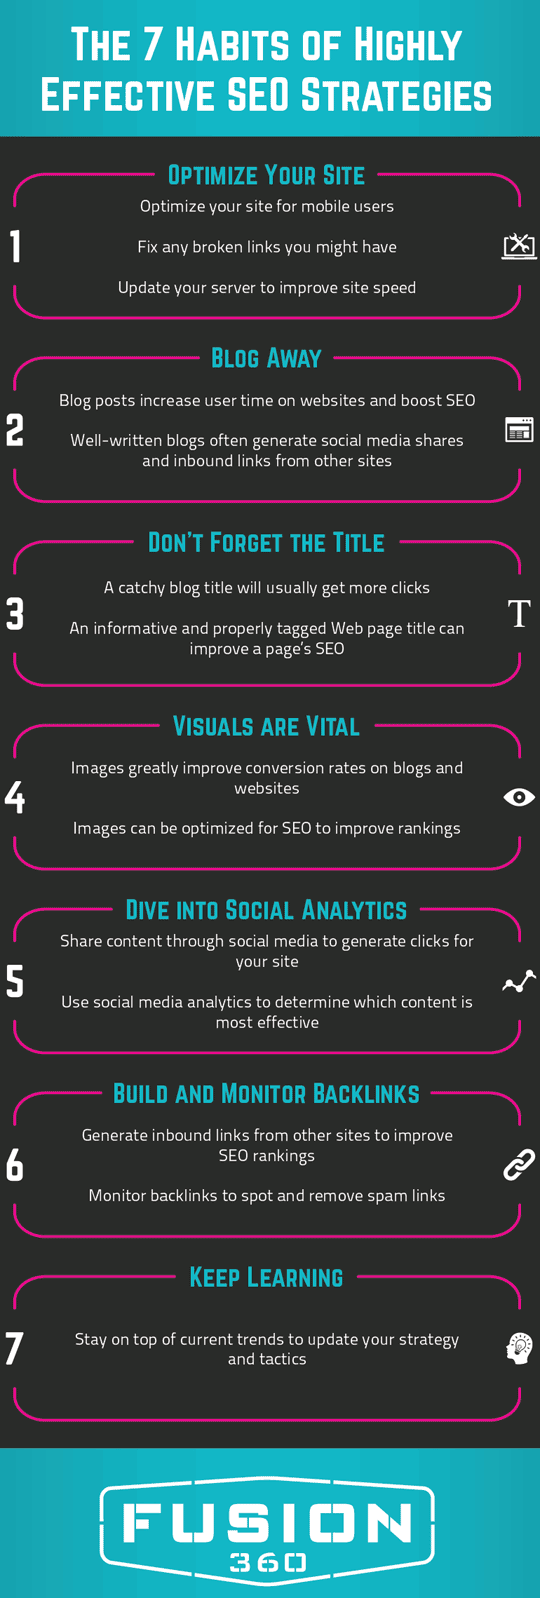 The 7 Habits of Highly Effective SEO Strategies infographic